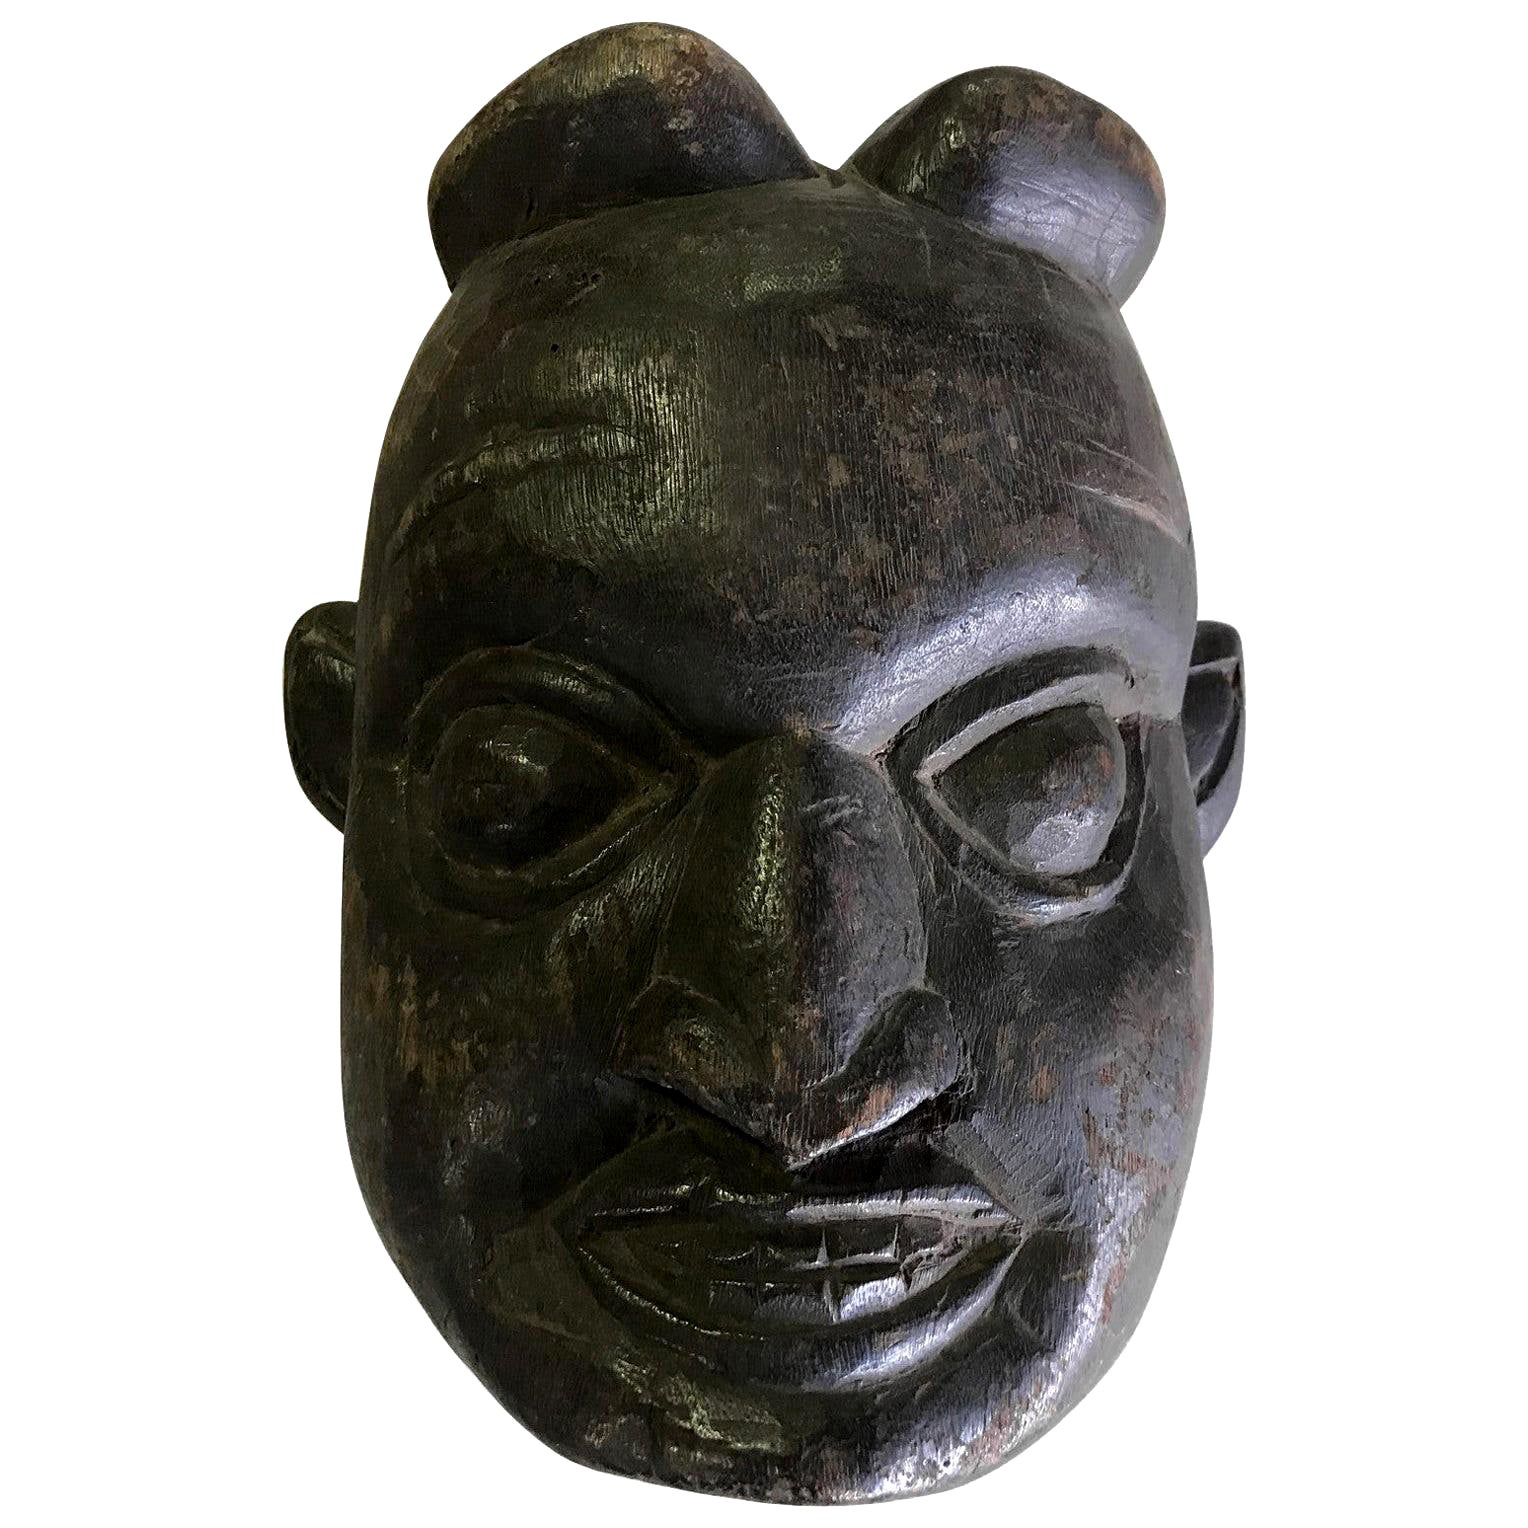 Heavy Oceanic Papua New Guinea or African Carved Wood Mask